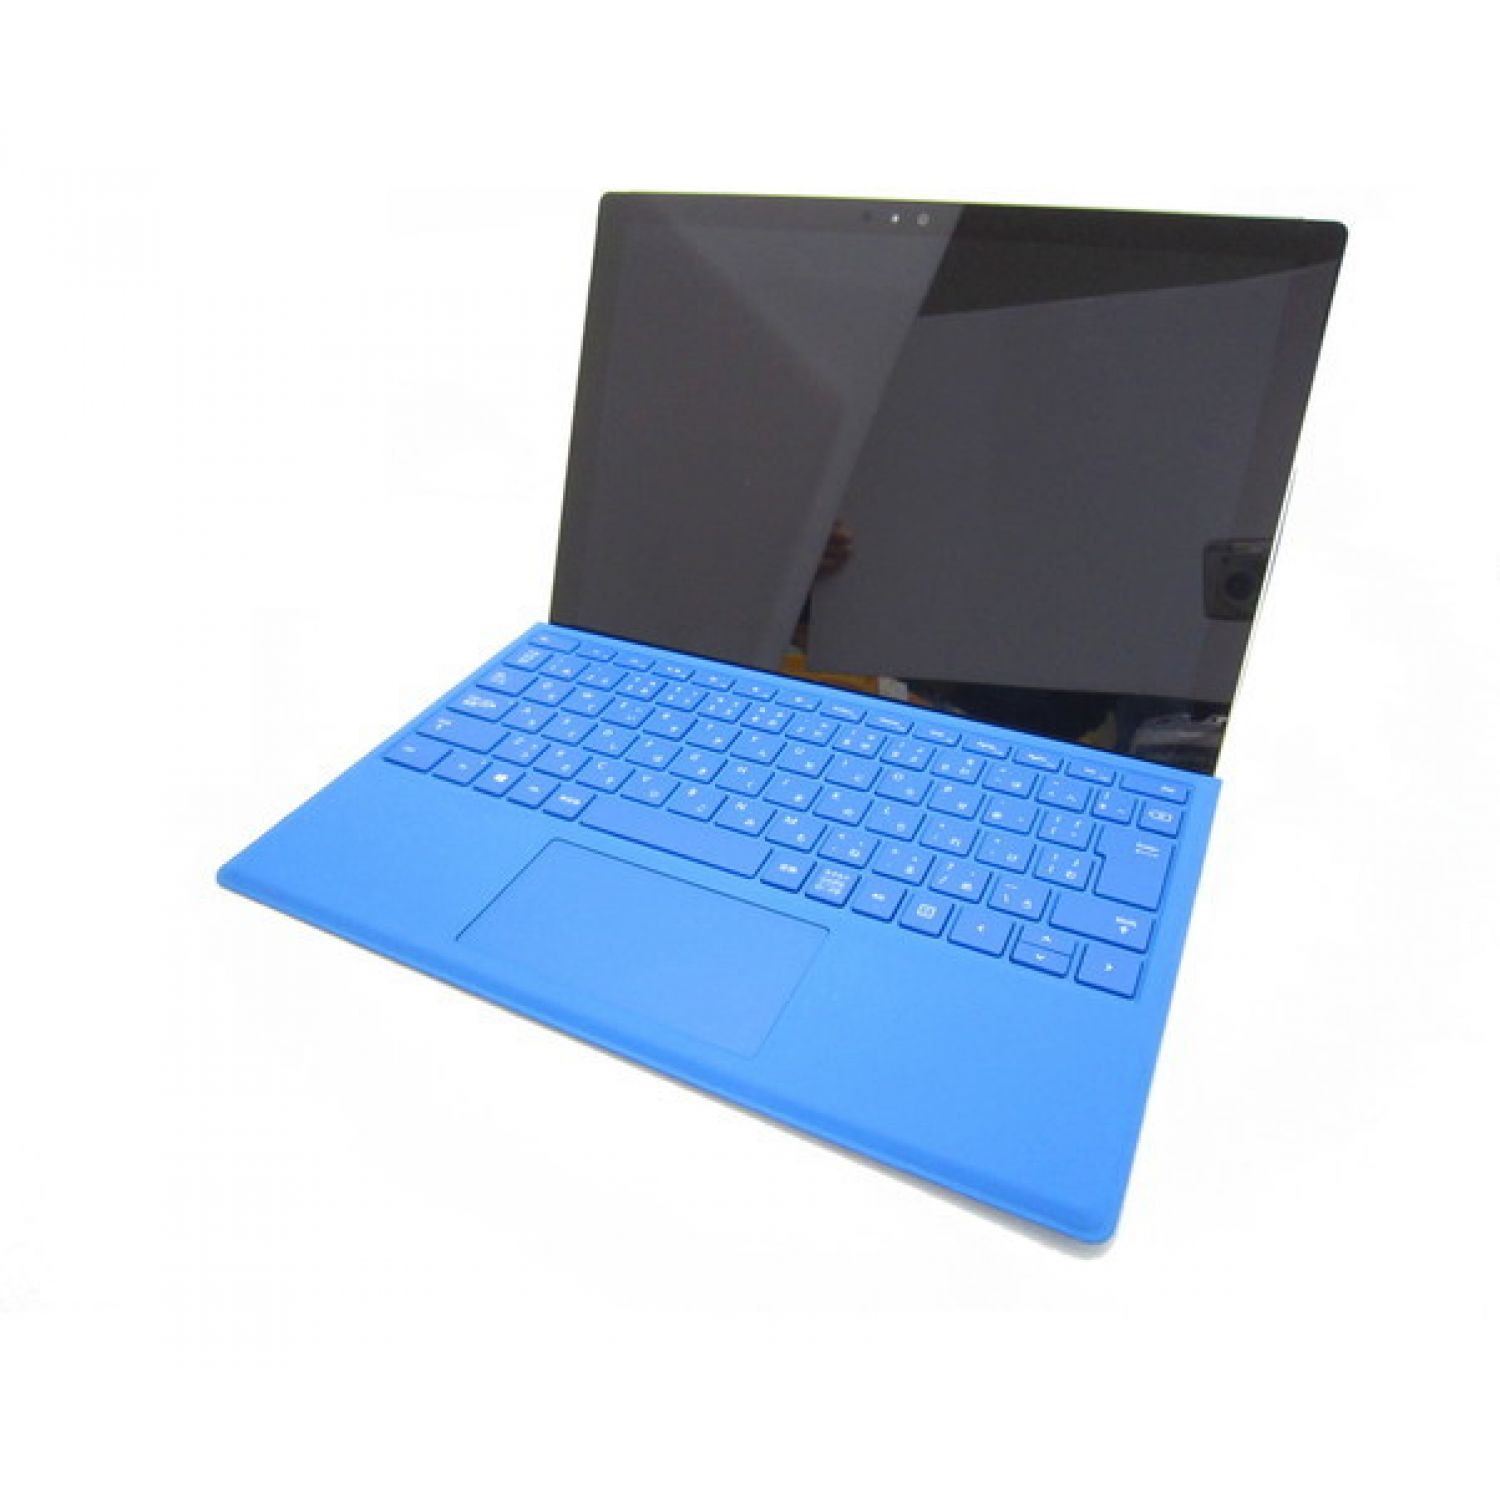 Microsoft (マイクロソフト) Surface Pro4｜トレファクONLINE